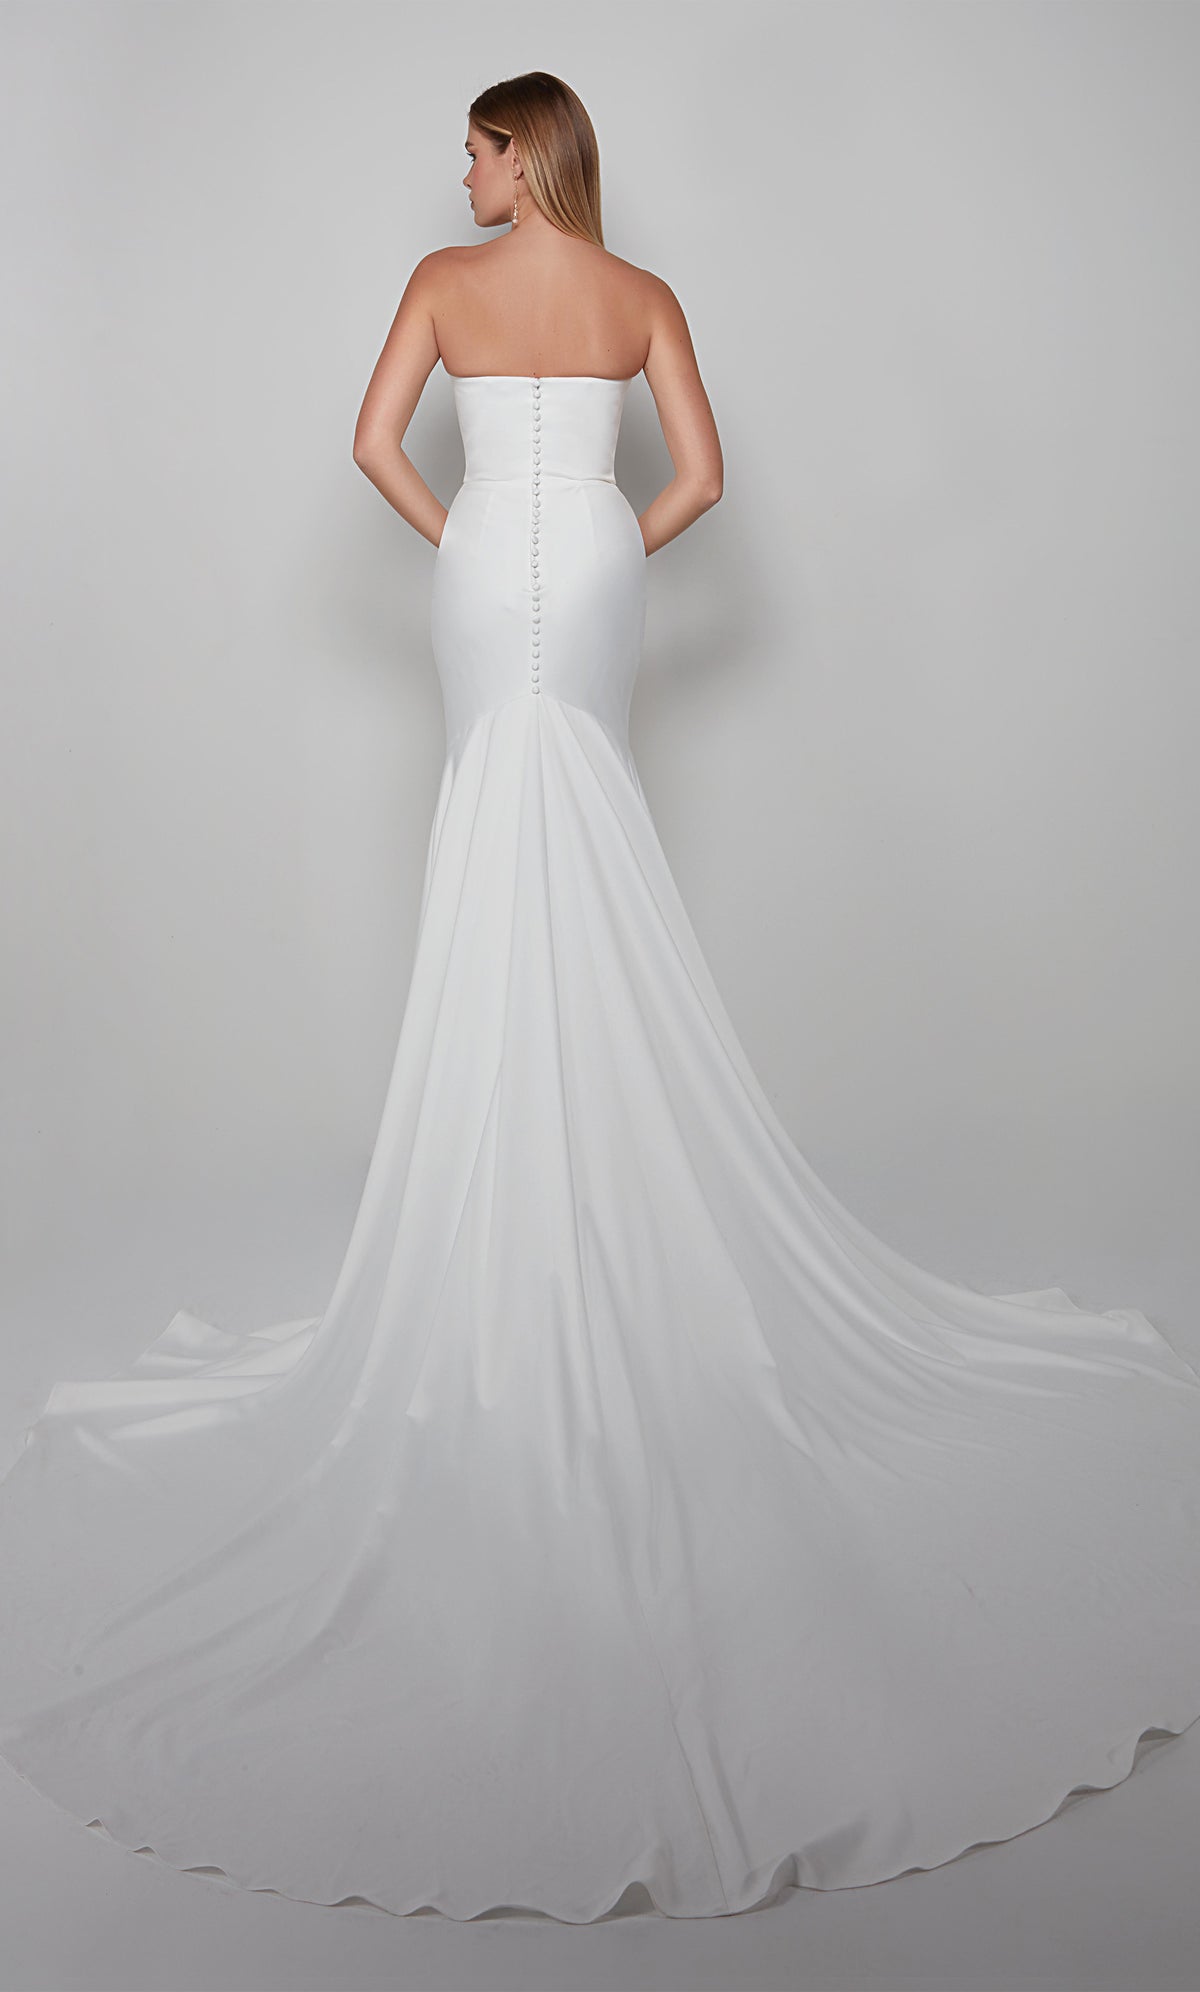 Strapless satin wedding dress with matching satin covered button closed back and train to complete the look.